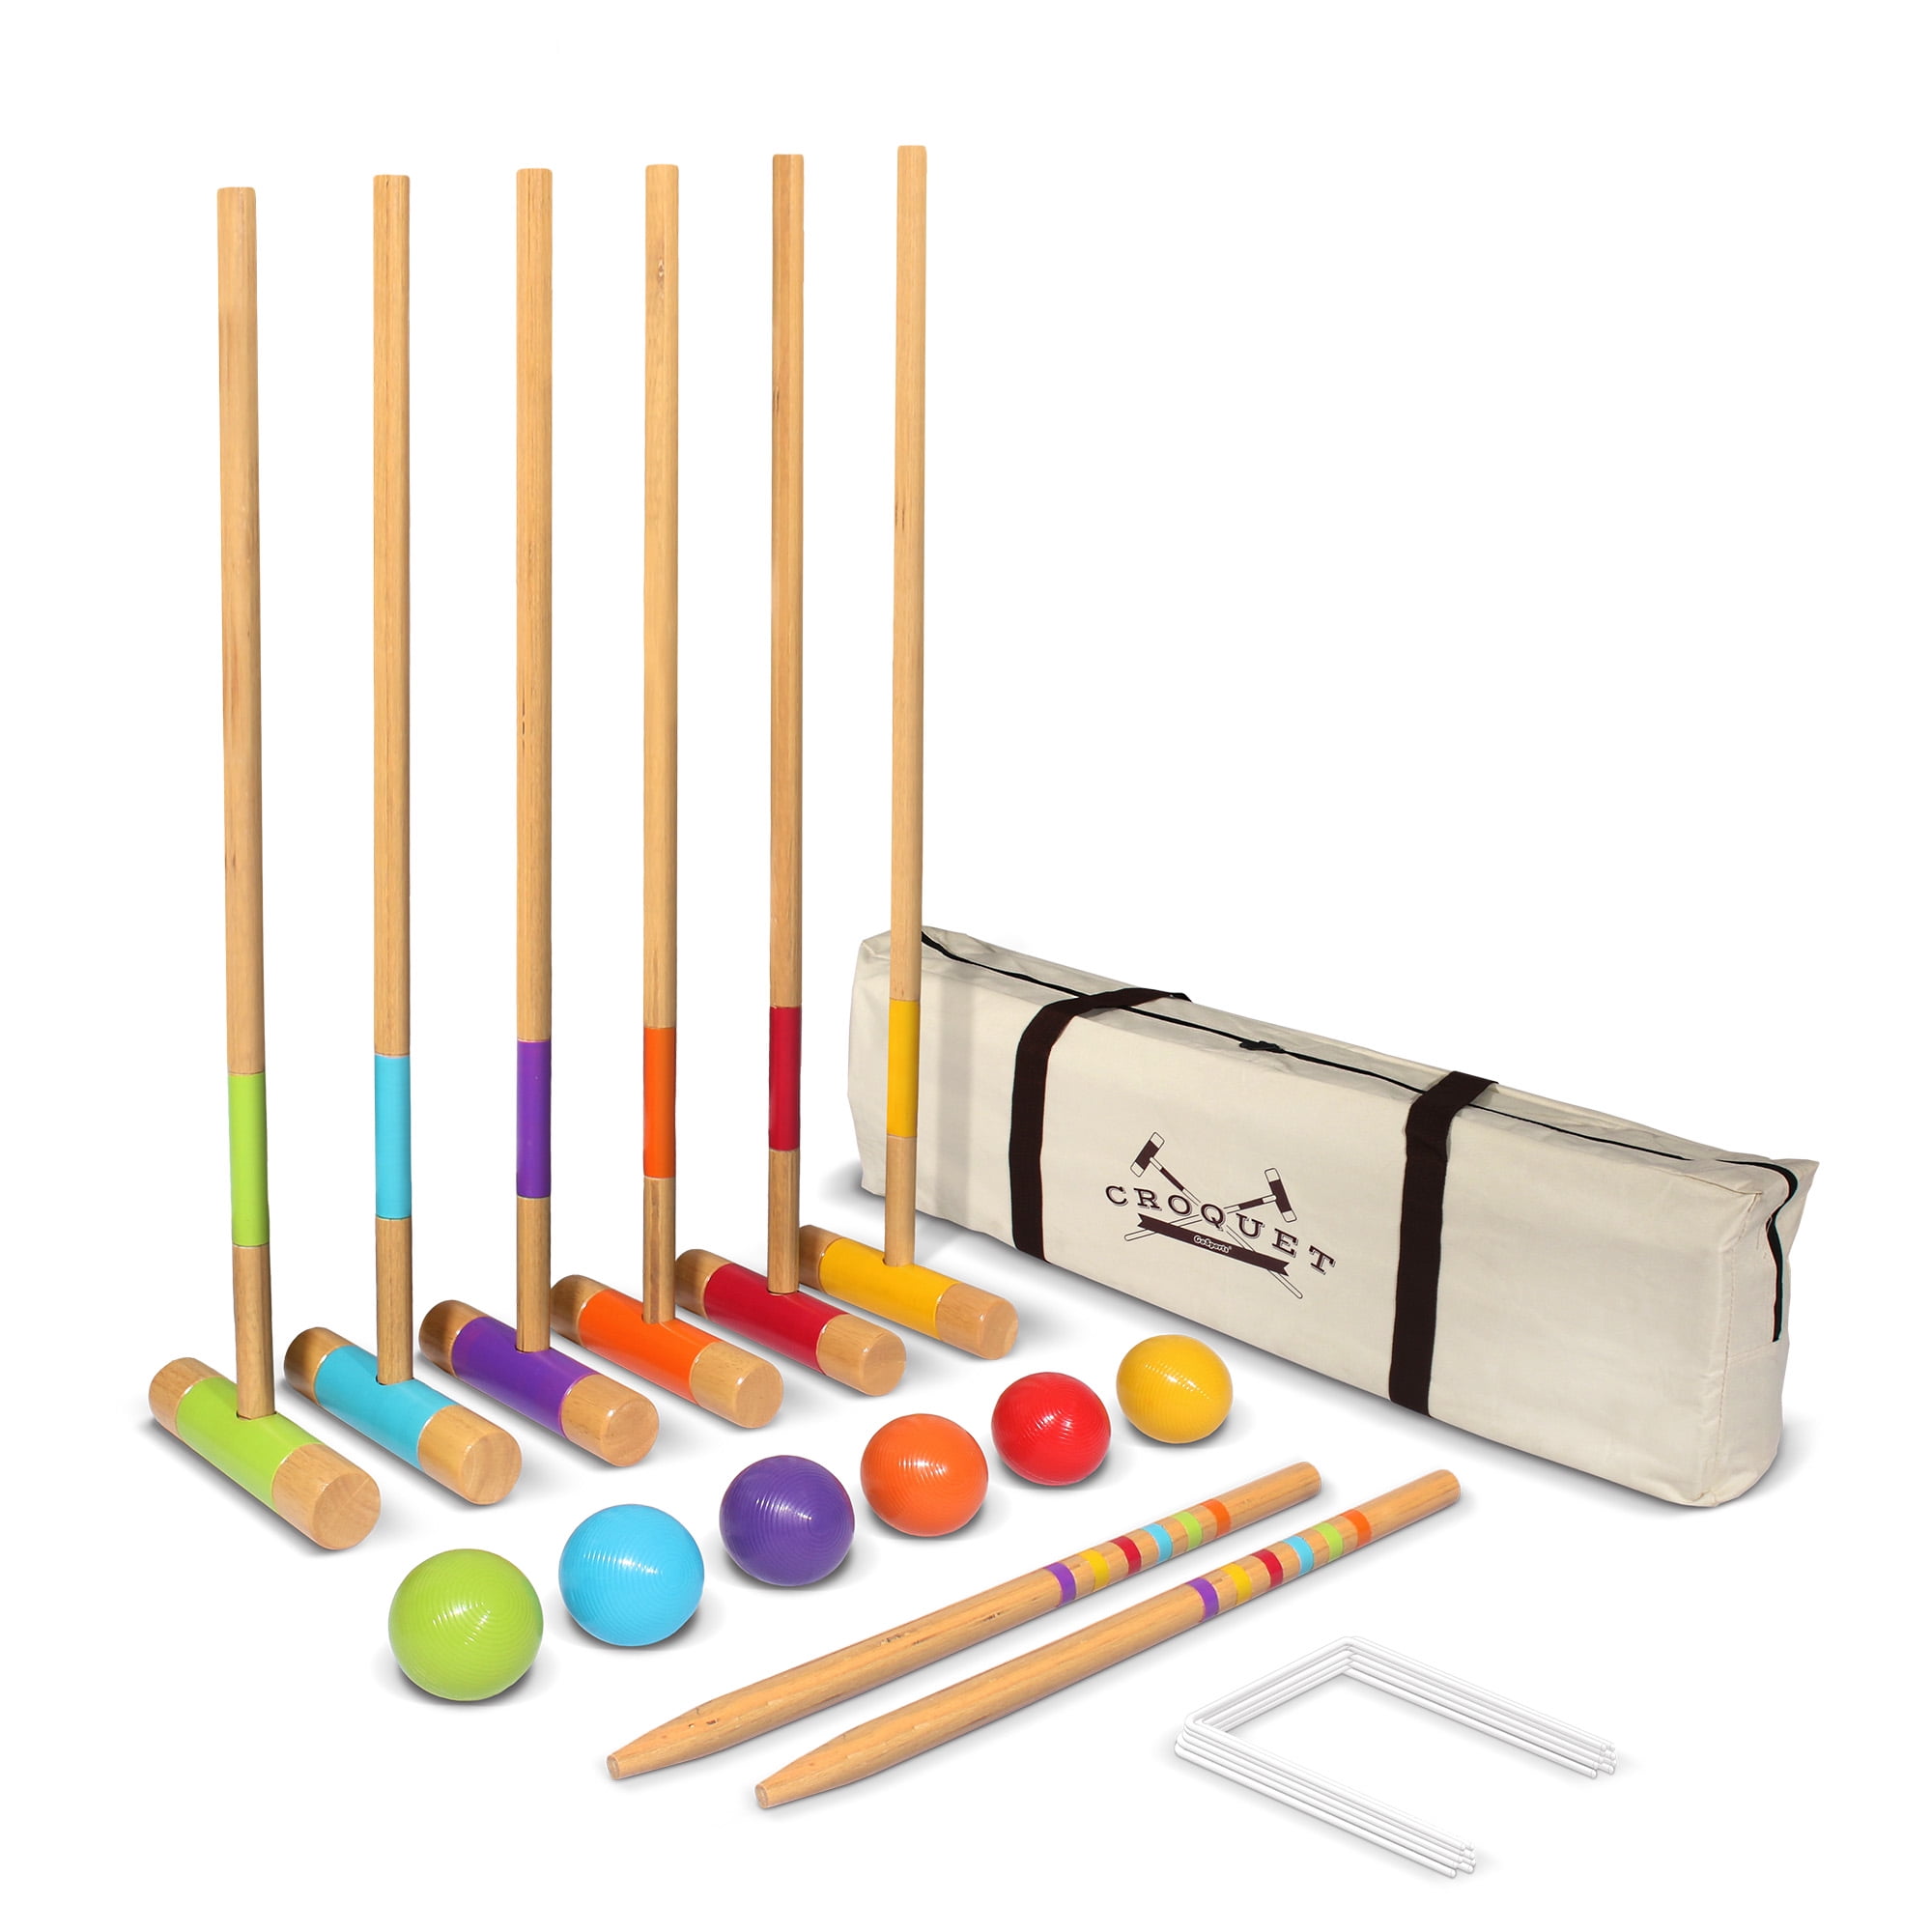 6-Player Complete Croquet Set with Case for Adults & Kids Backyard Lawn Game 